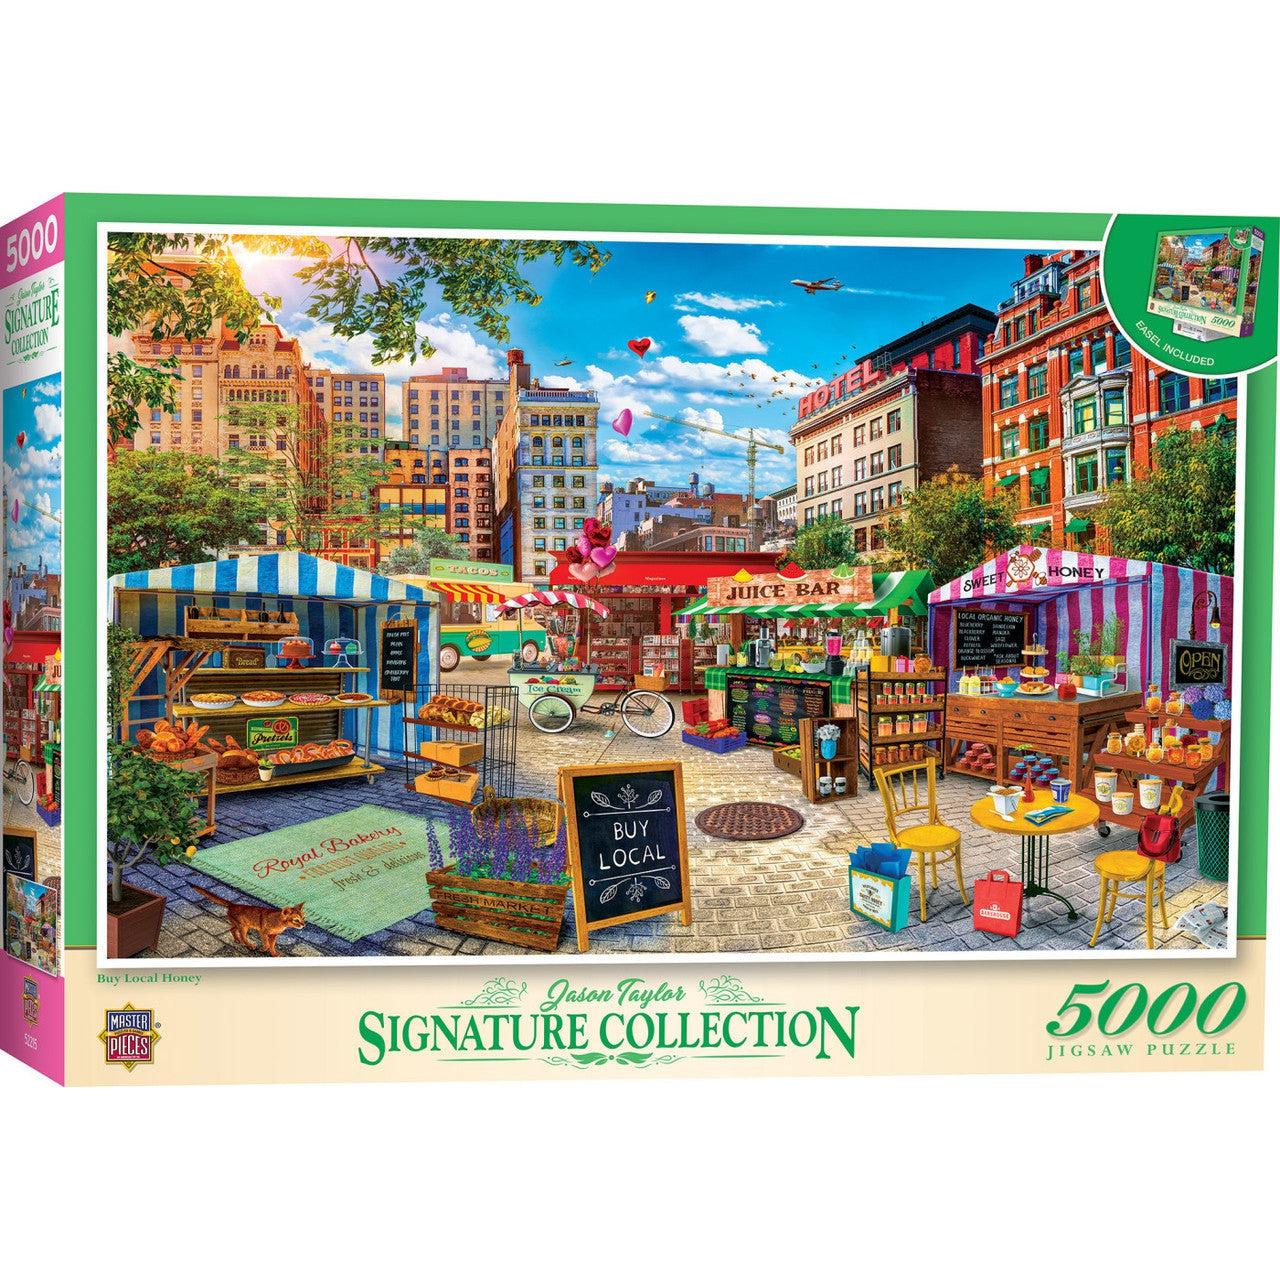 Country Fair - 5000 Piece Jigsaw Puzzle - Ravensburger - COMPLETE